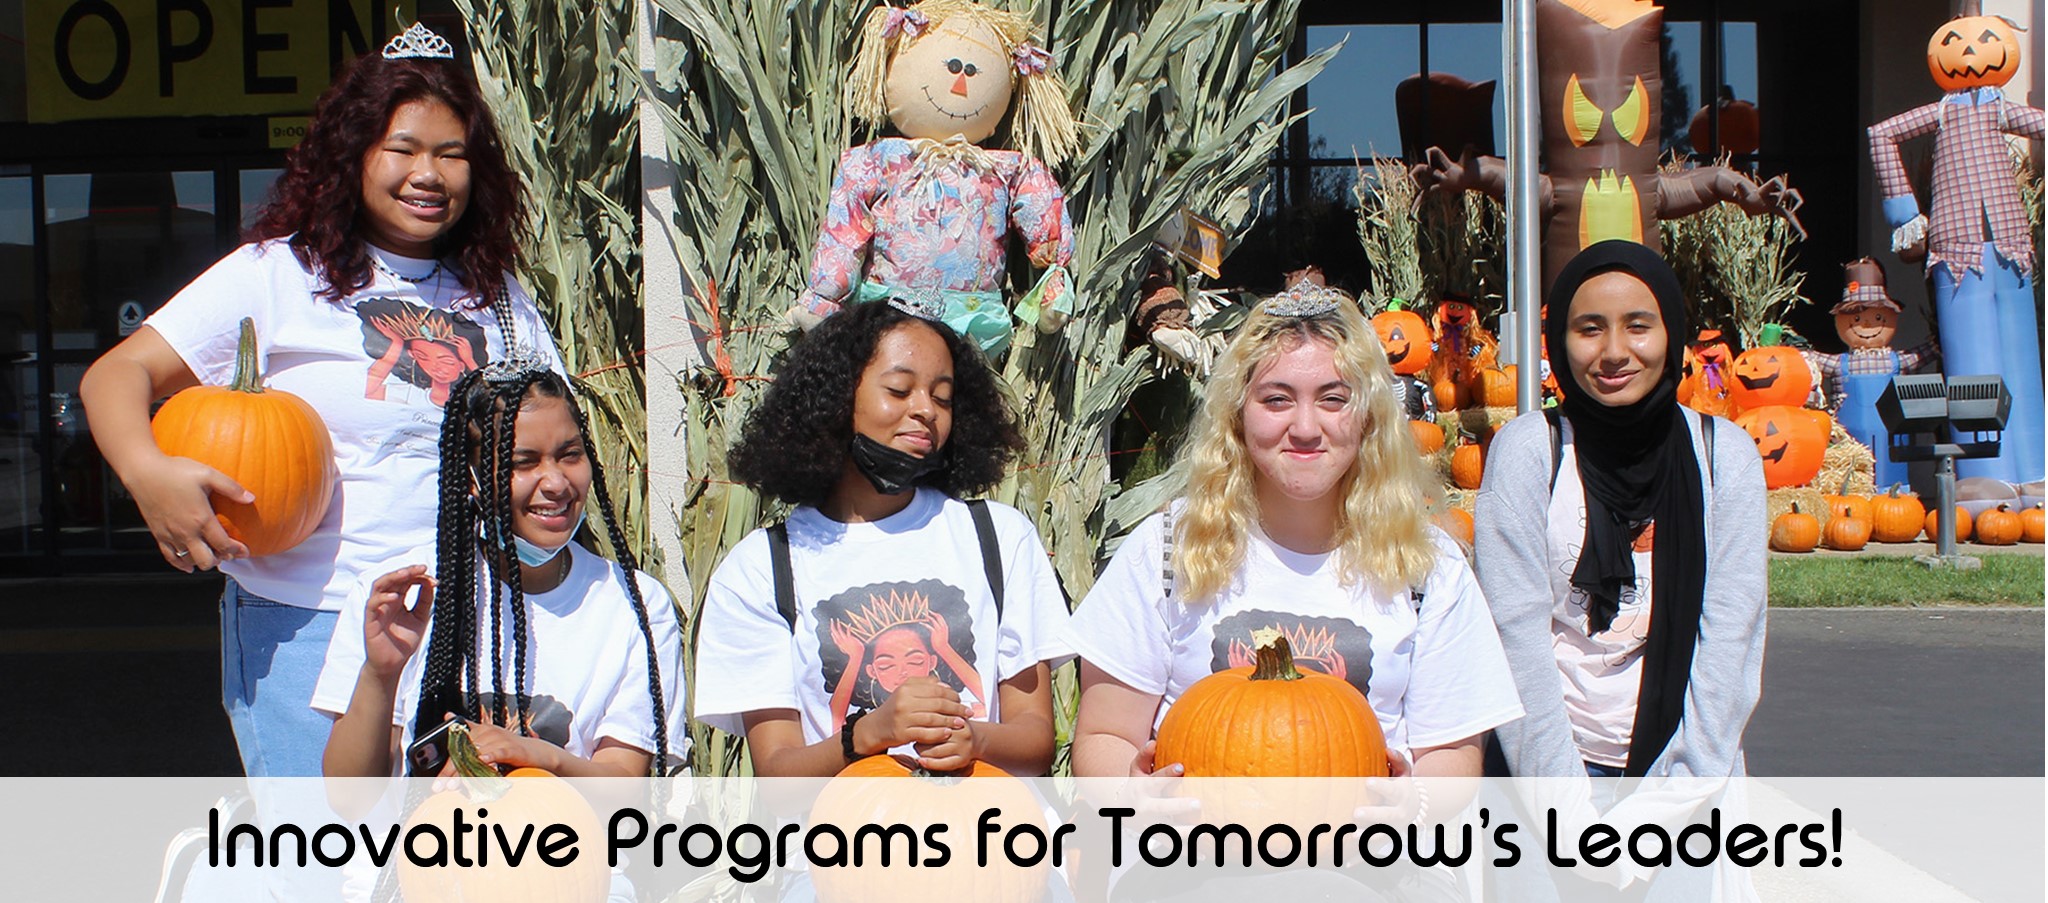 Girls holding pumpkins a text overlay reads Innovative programs for tomorrow's Leaders!